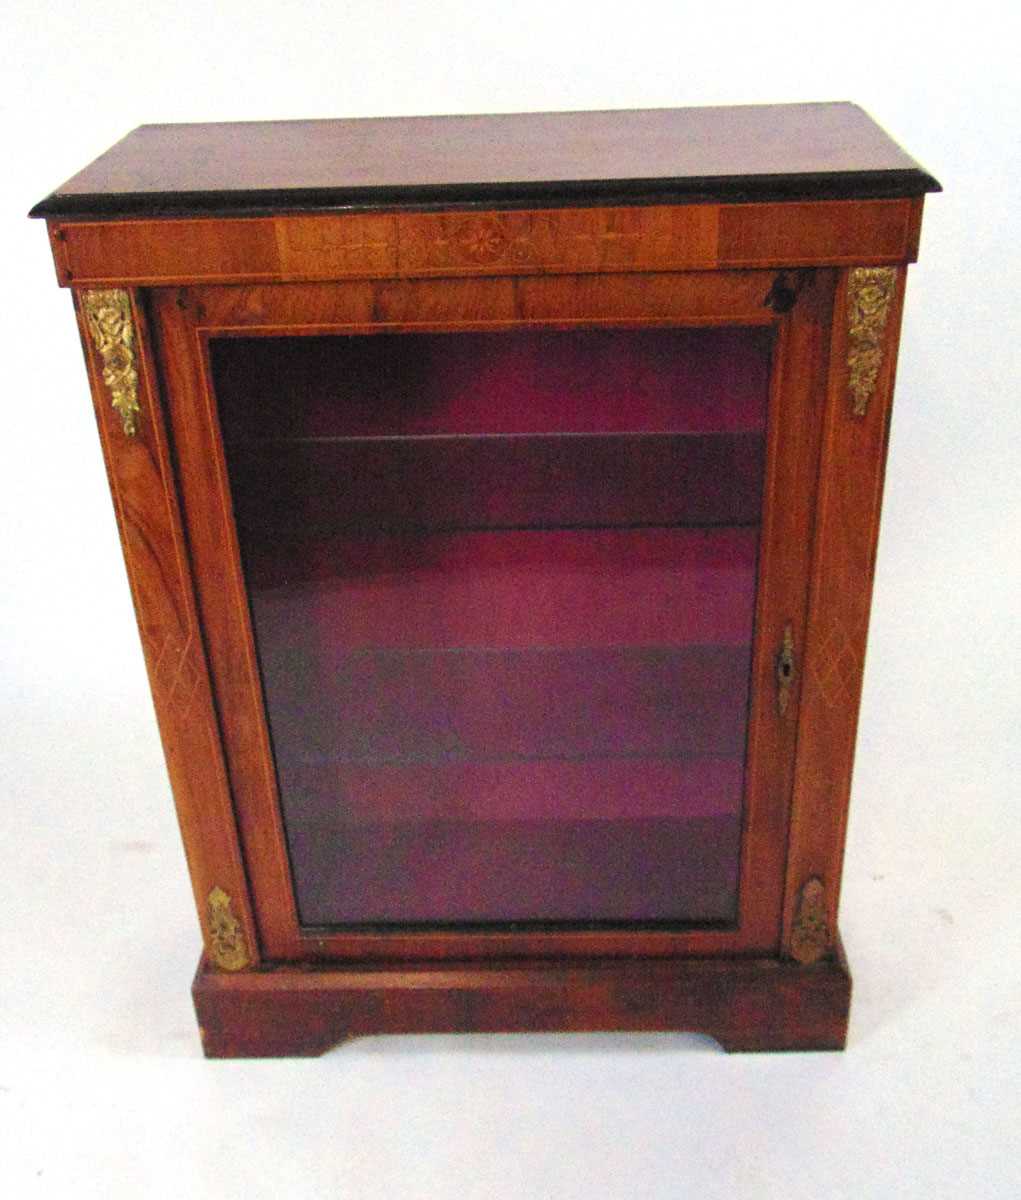 A Victorian walnut veneered vitrine, with bellflower and strung decoration, with applied gilt